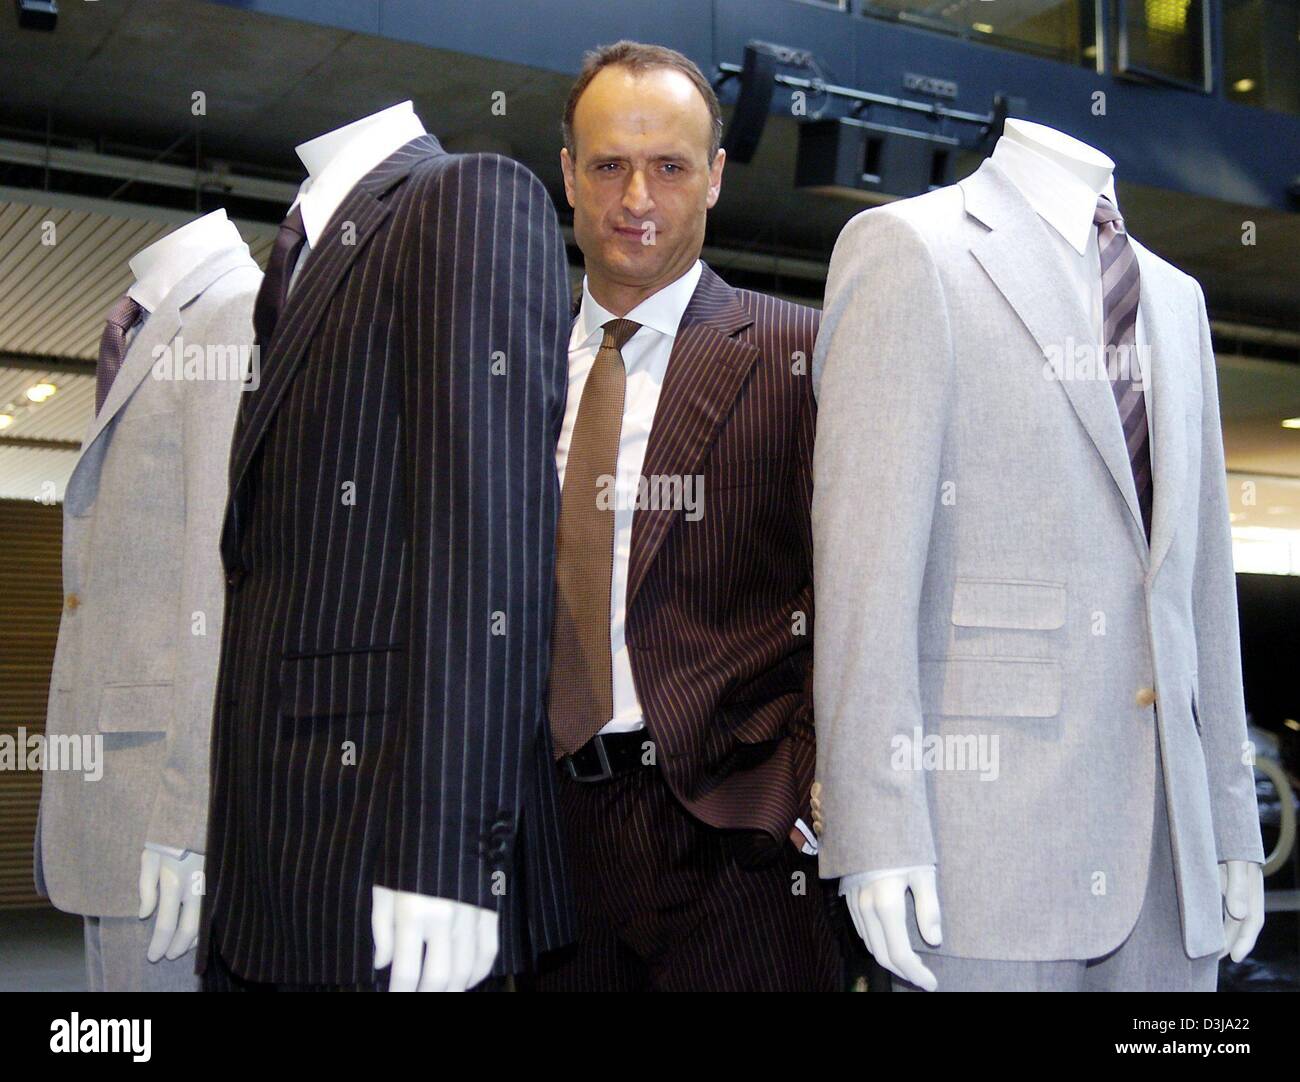 (dpa) - Bruno Saelzer, CEO and Chairman of German fashion giant Hugo Boss, stands between current suit models during a balance press conference at the company's headquarters in Metzingen, Germany, 1 April 2004. The company is set to slightly raise profits this year. Stock Photo